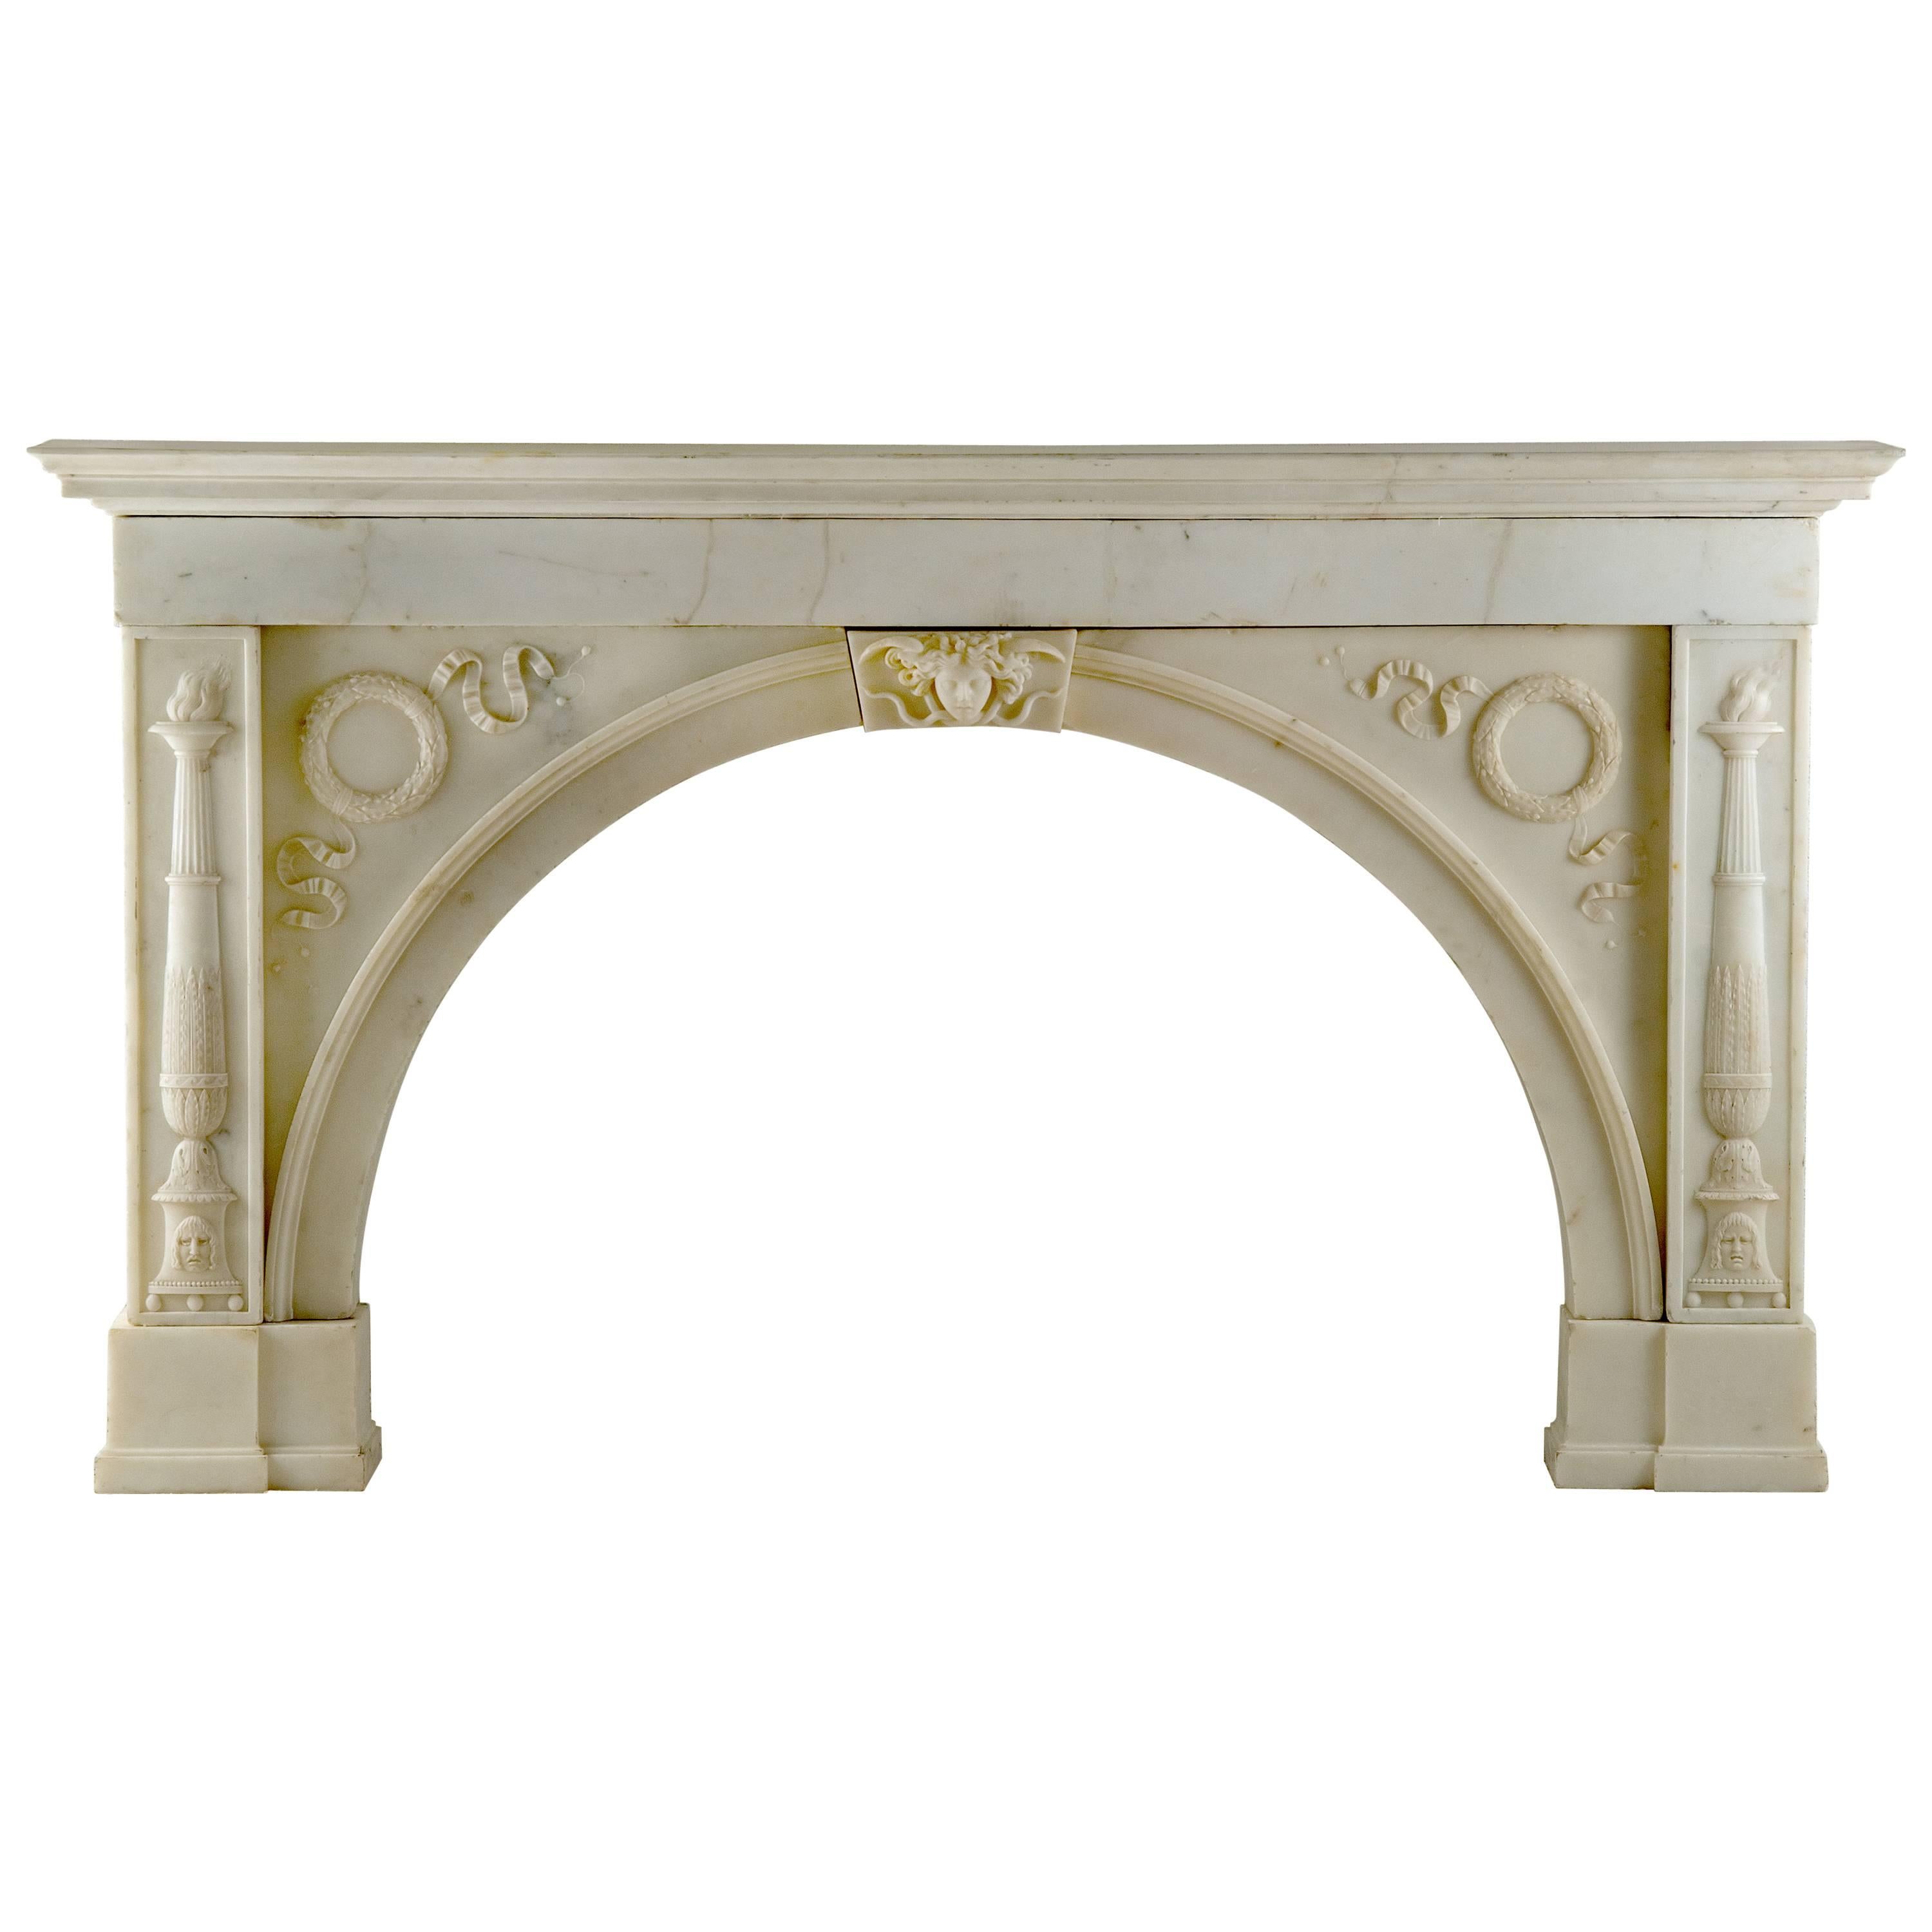 Beautiful English Fireplace in White Marble, Early 19th Century For Sale